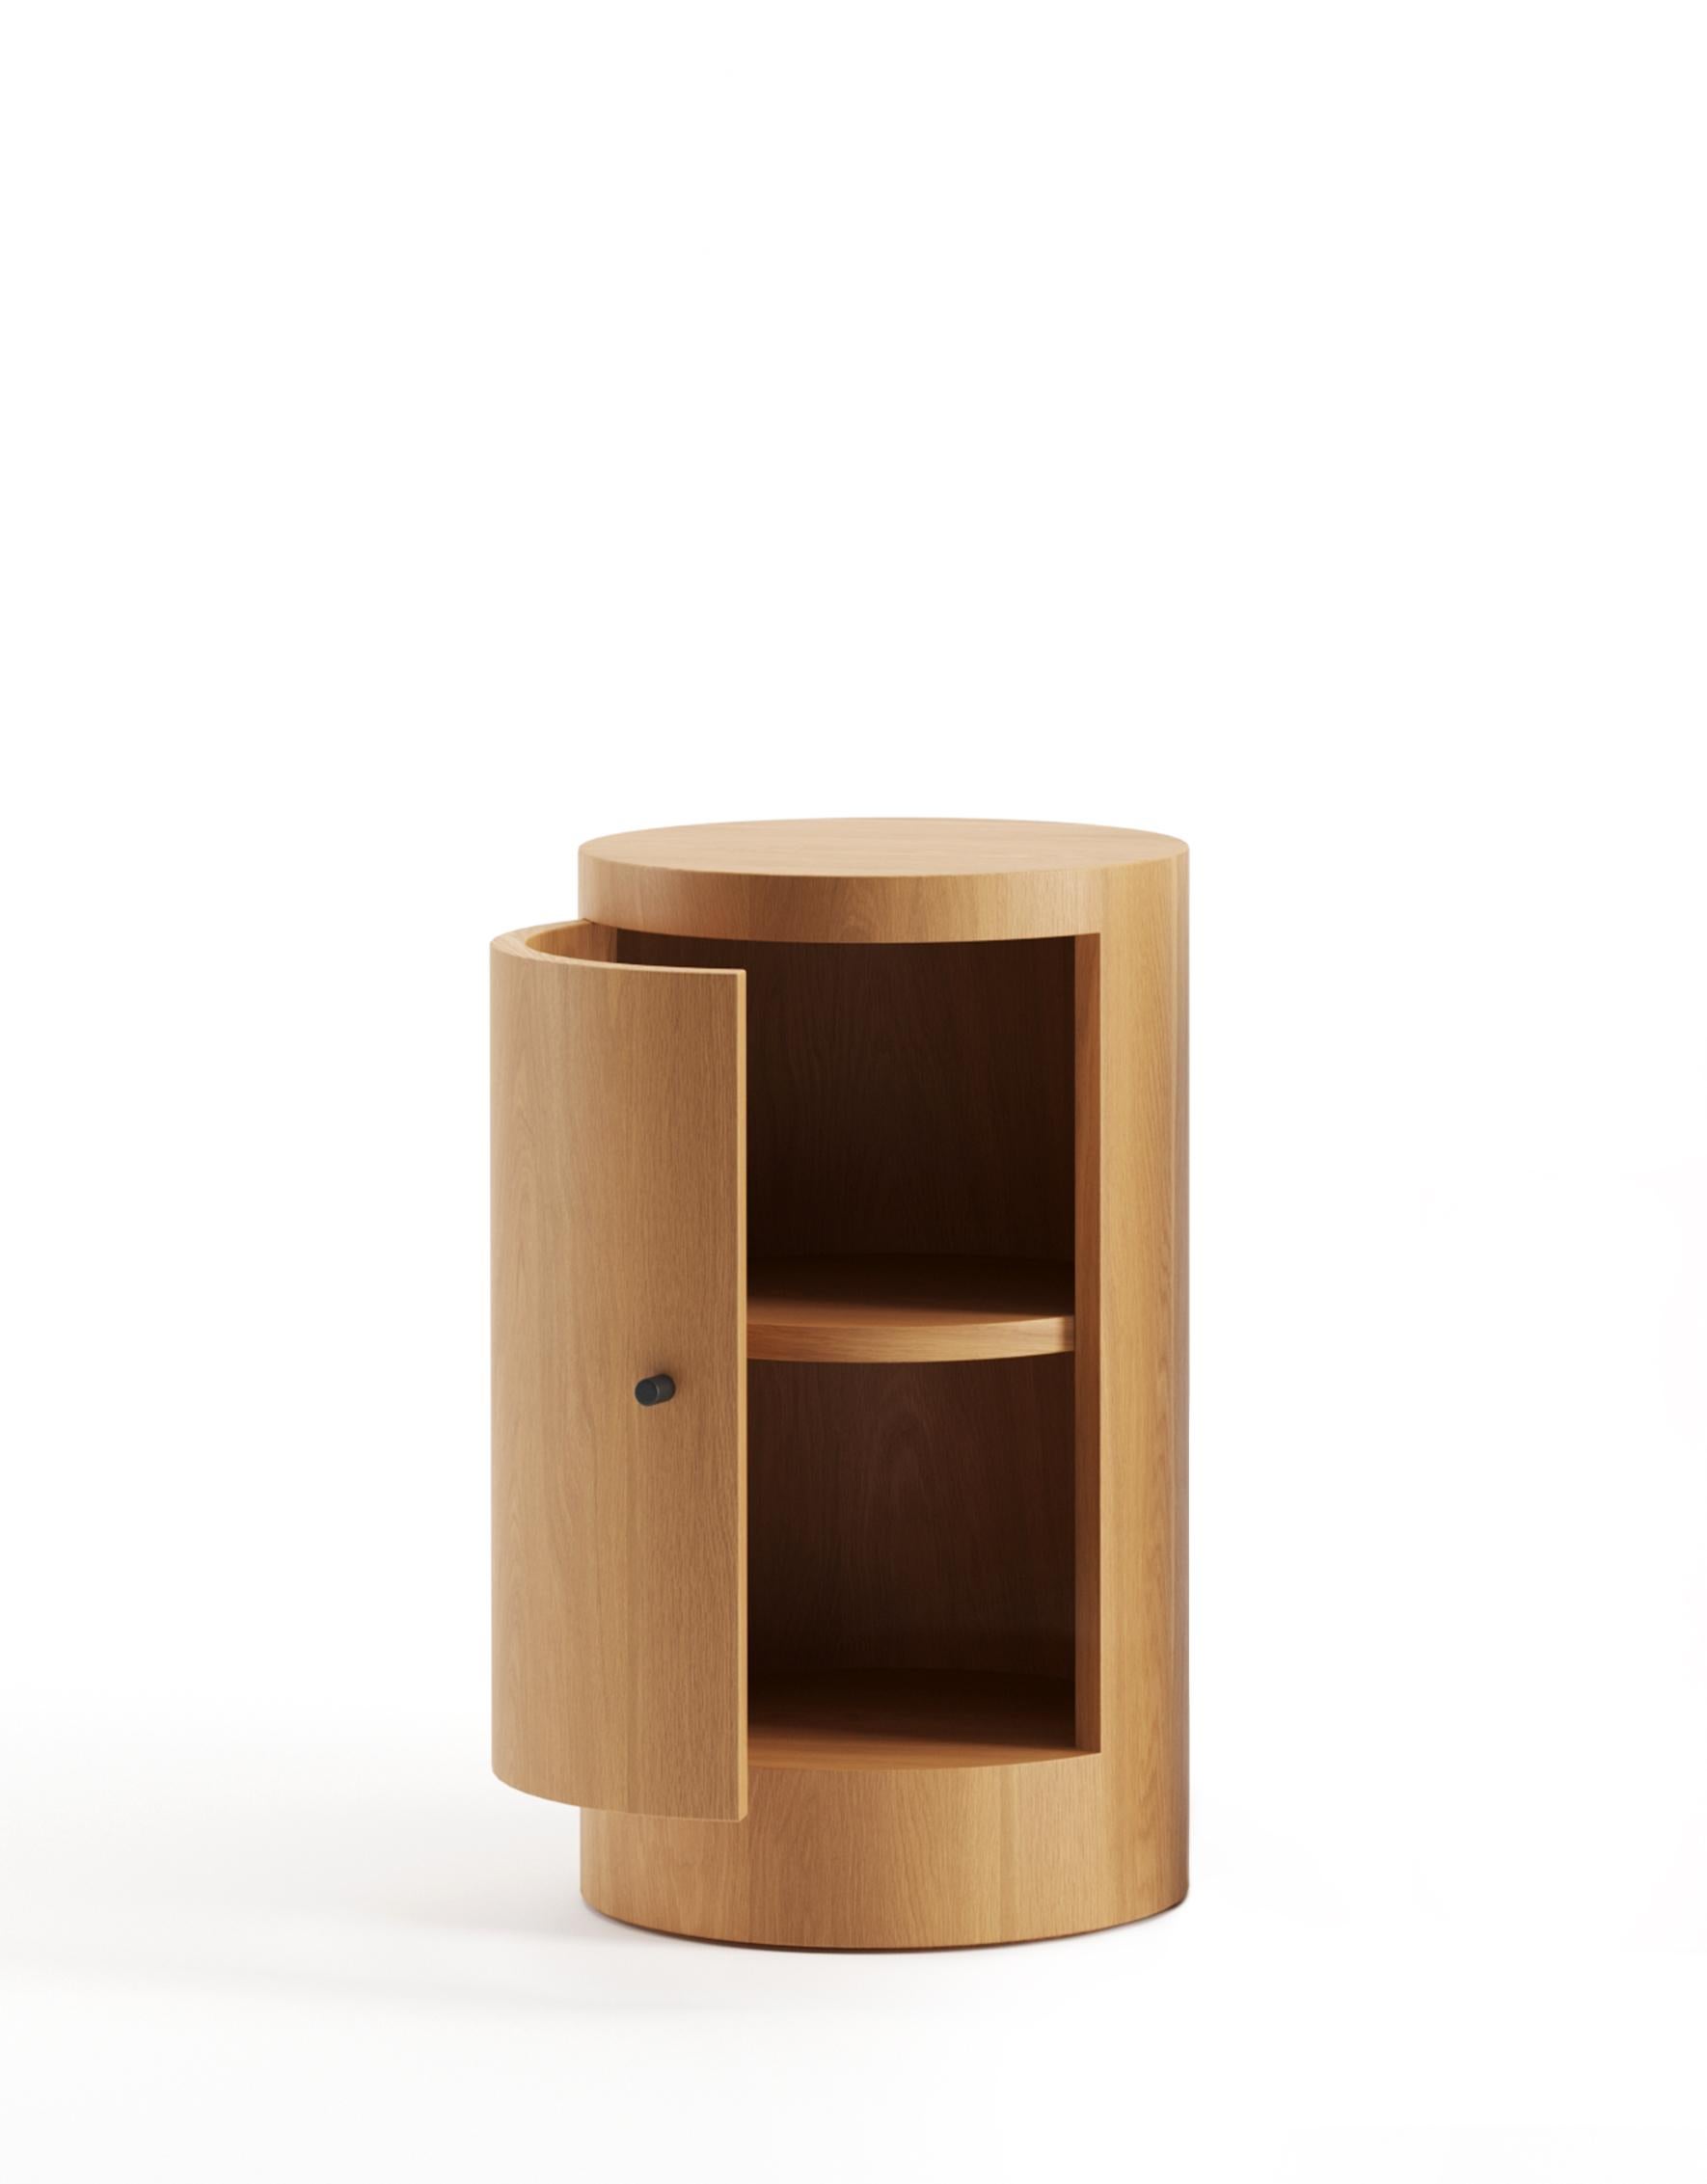 Neatly proportioned with exceptional detailing, the Constant nightstand is your perfect bedside partner. In our furniture making, the idea is to create special pieces that you can build a space around, whose designs highlight rather than overshadow